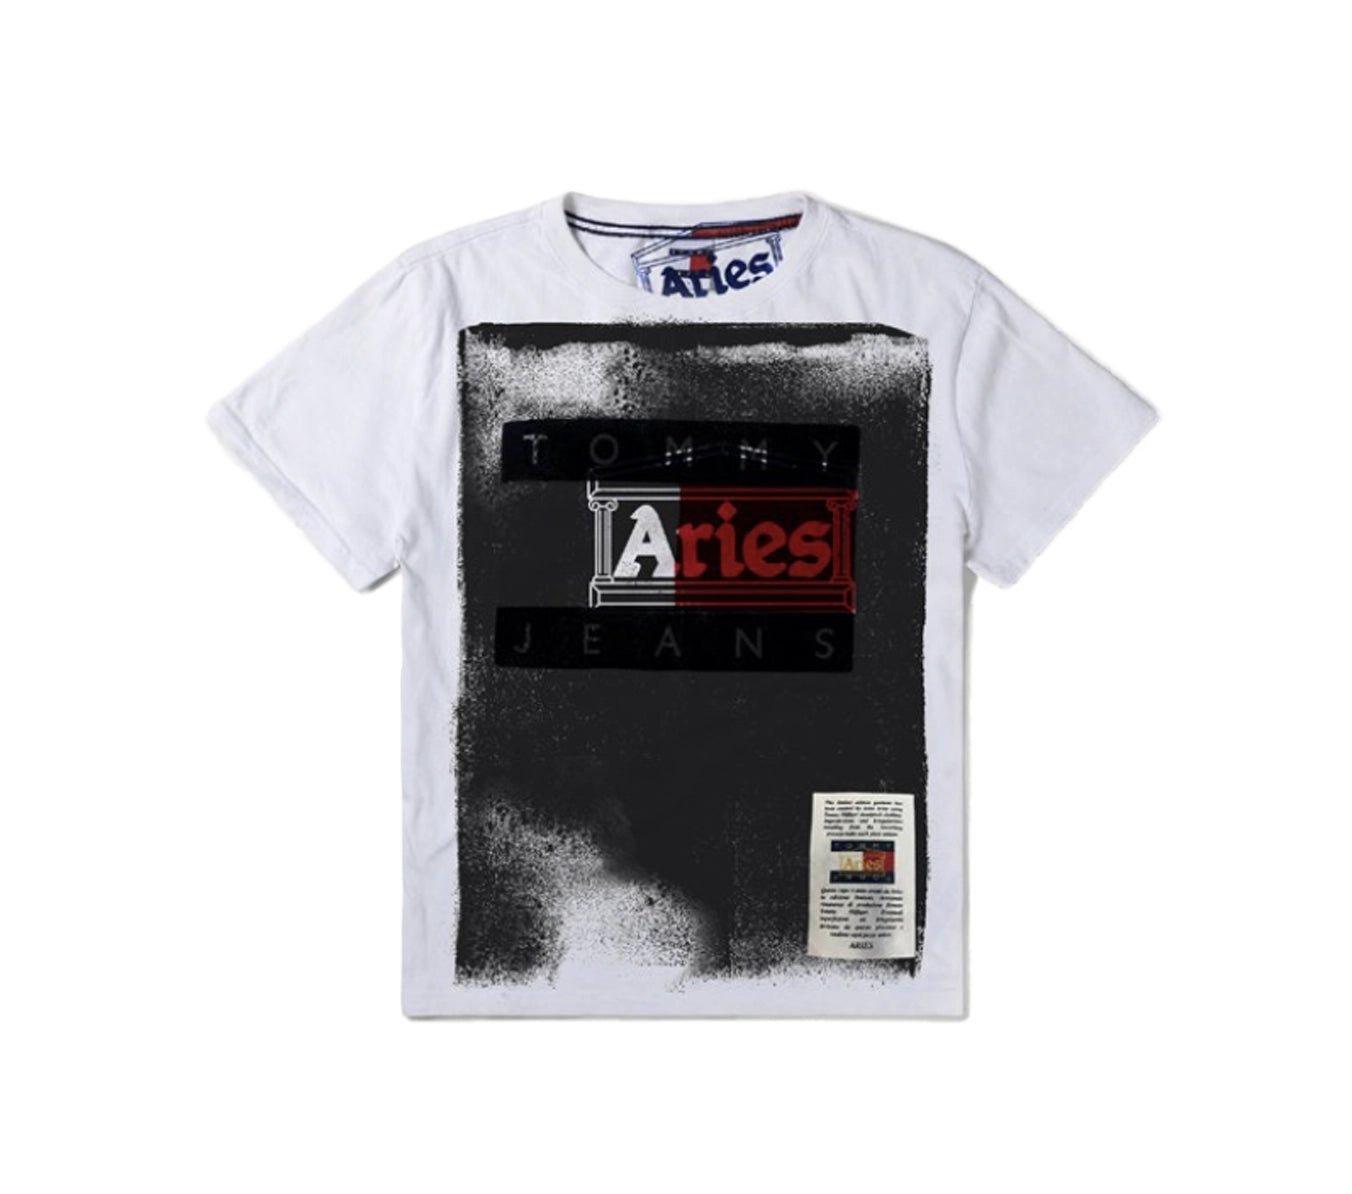 Tommy Jeans x ARIES Unique SS Tee 2 - One of a kind - SUPERCONSCIOUS BERLIN